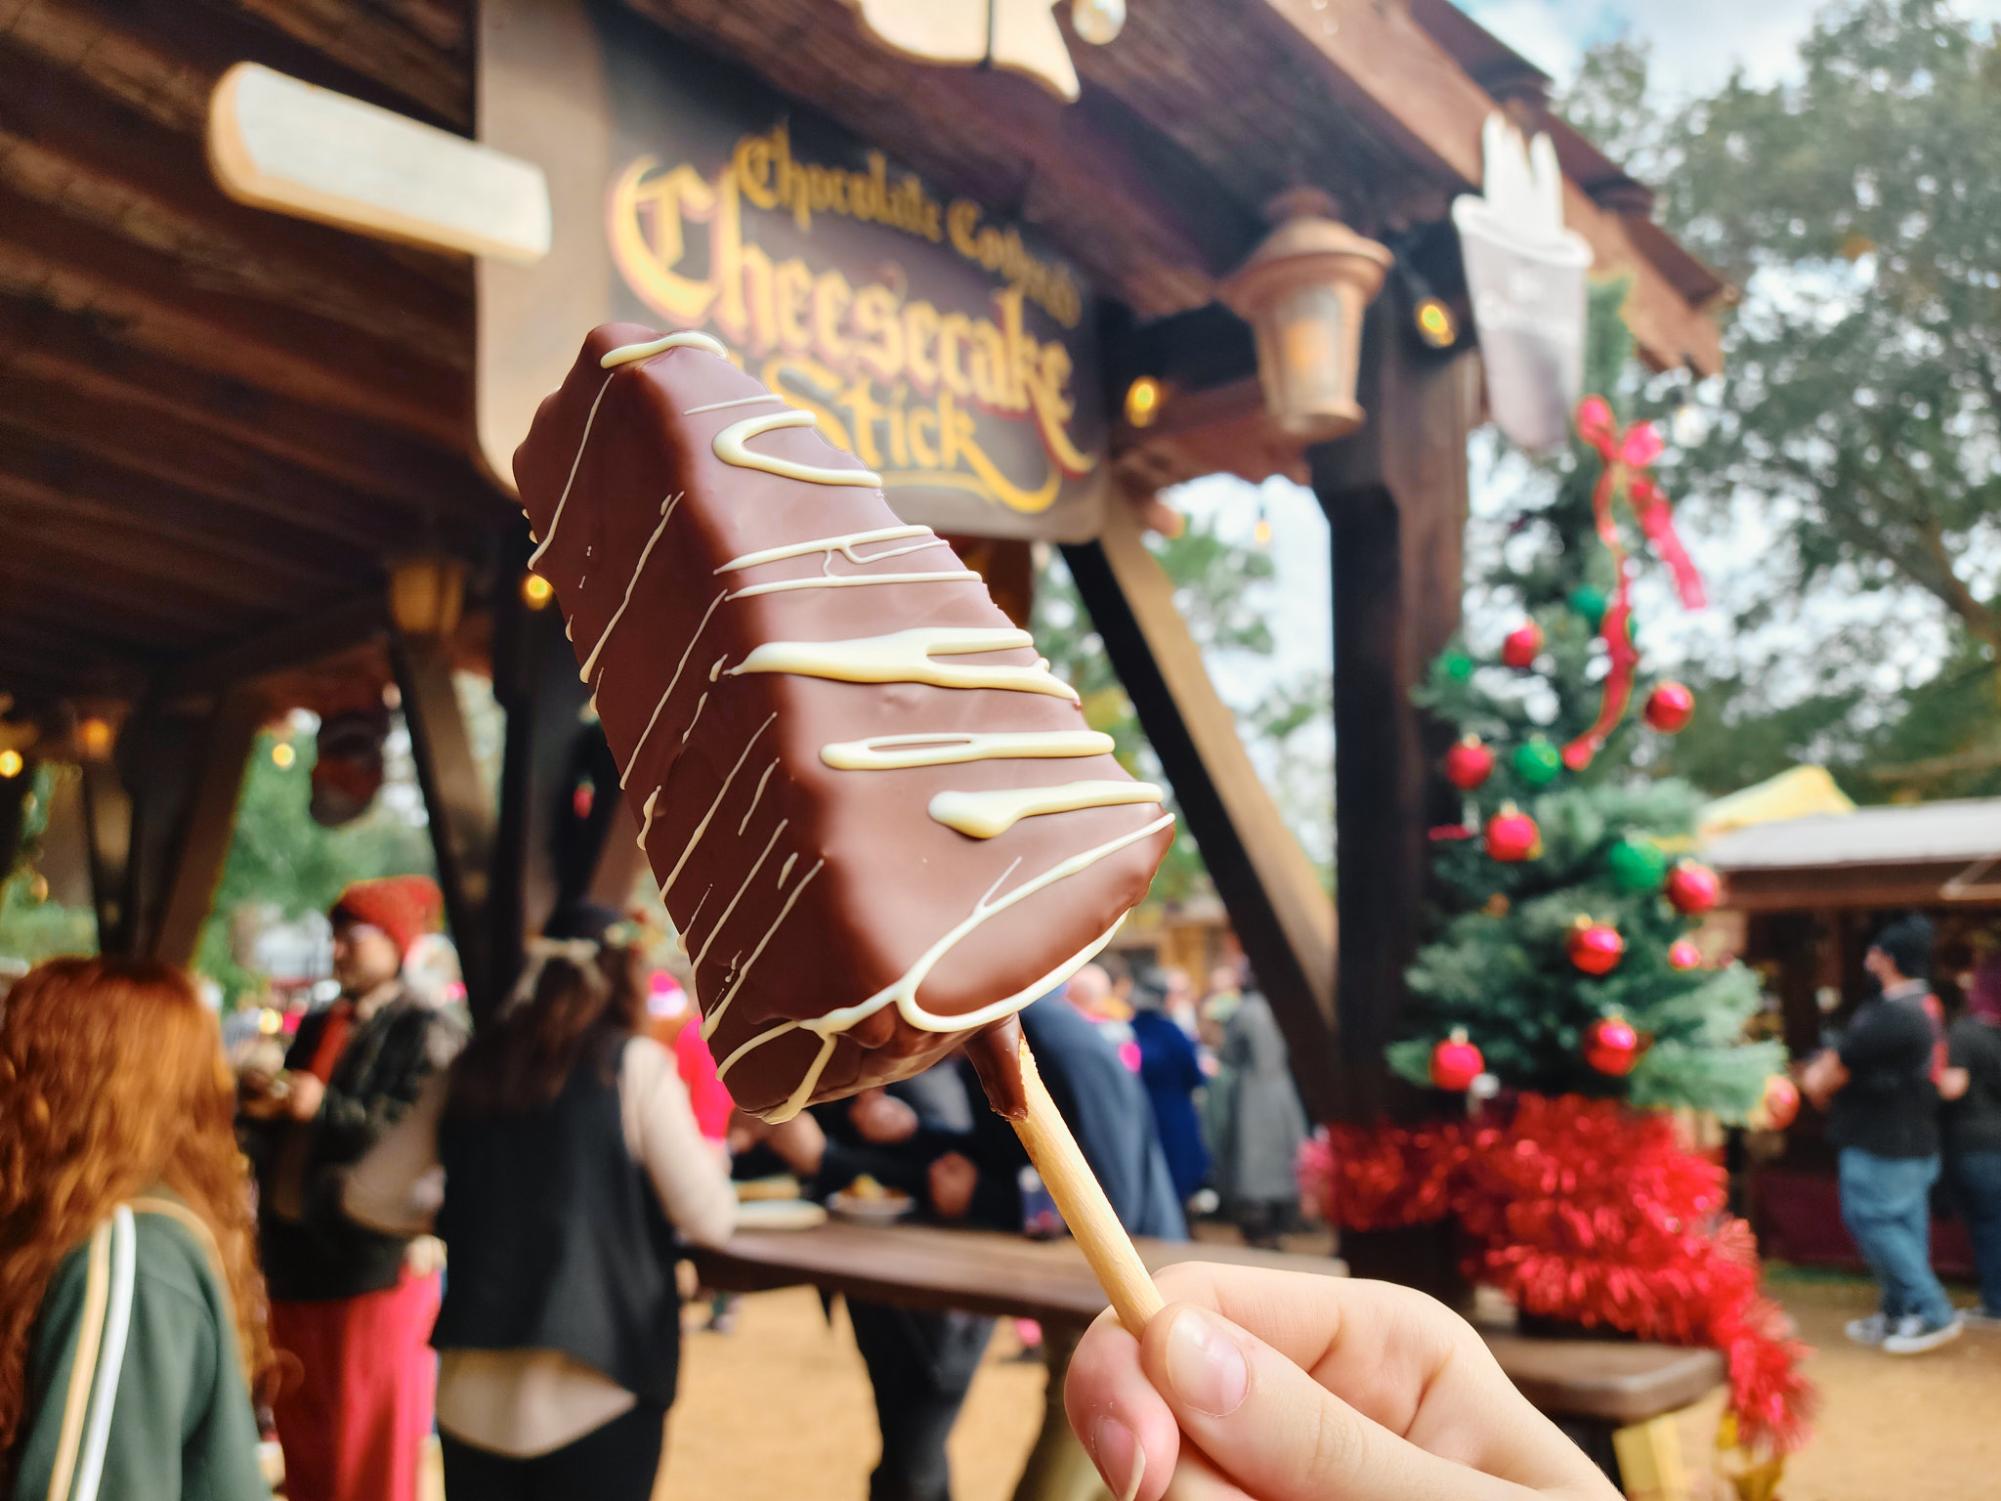 Semi-frozen chocolate dipped cheesecake on a stick. Maybe not the best choice for a cold day, but satisfying nonetheless.